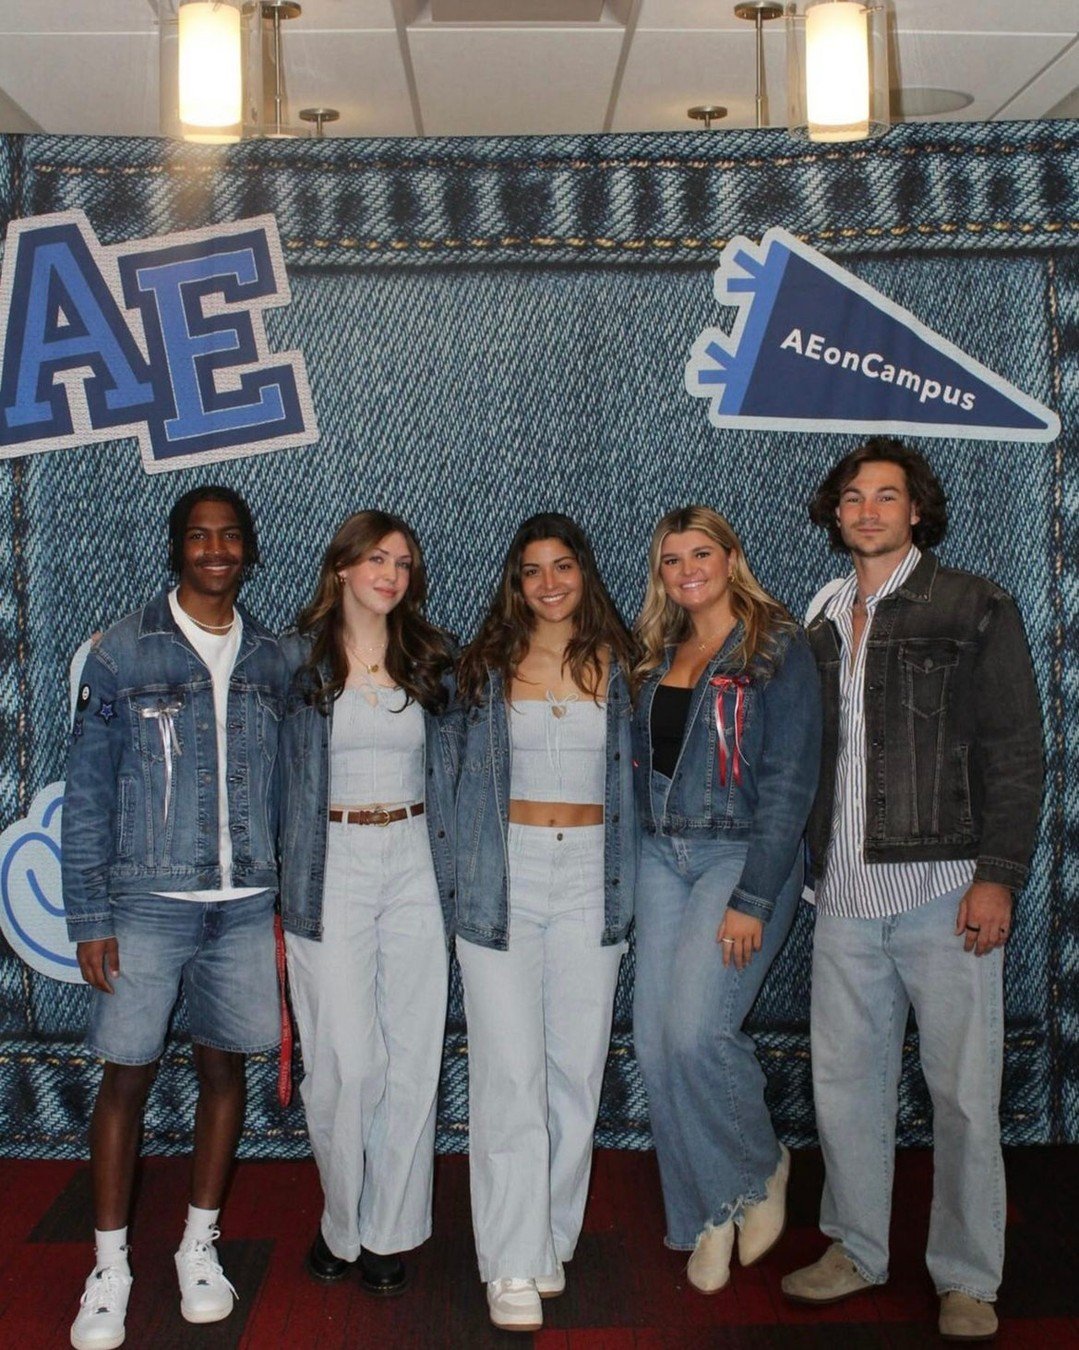 #AEOnCampus has arrived for its inaugural year! @Campustrendsetters is partnering with @Americaneagle for its first-ever on-campus ambassador program to promote AE across campuses nationwide. 👖 🌞 Swipe through for your perfect outfit inspo. 🛍️